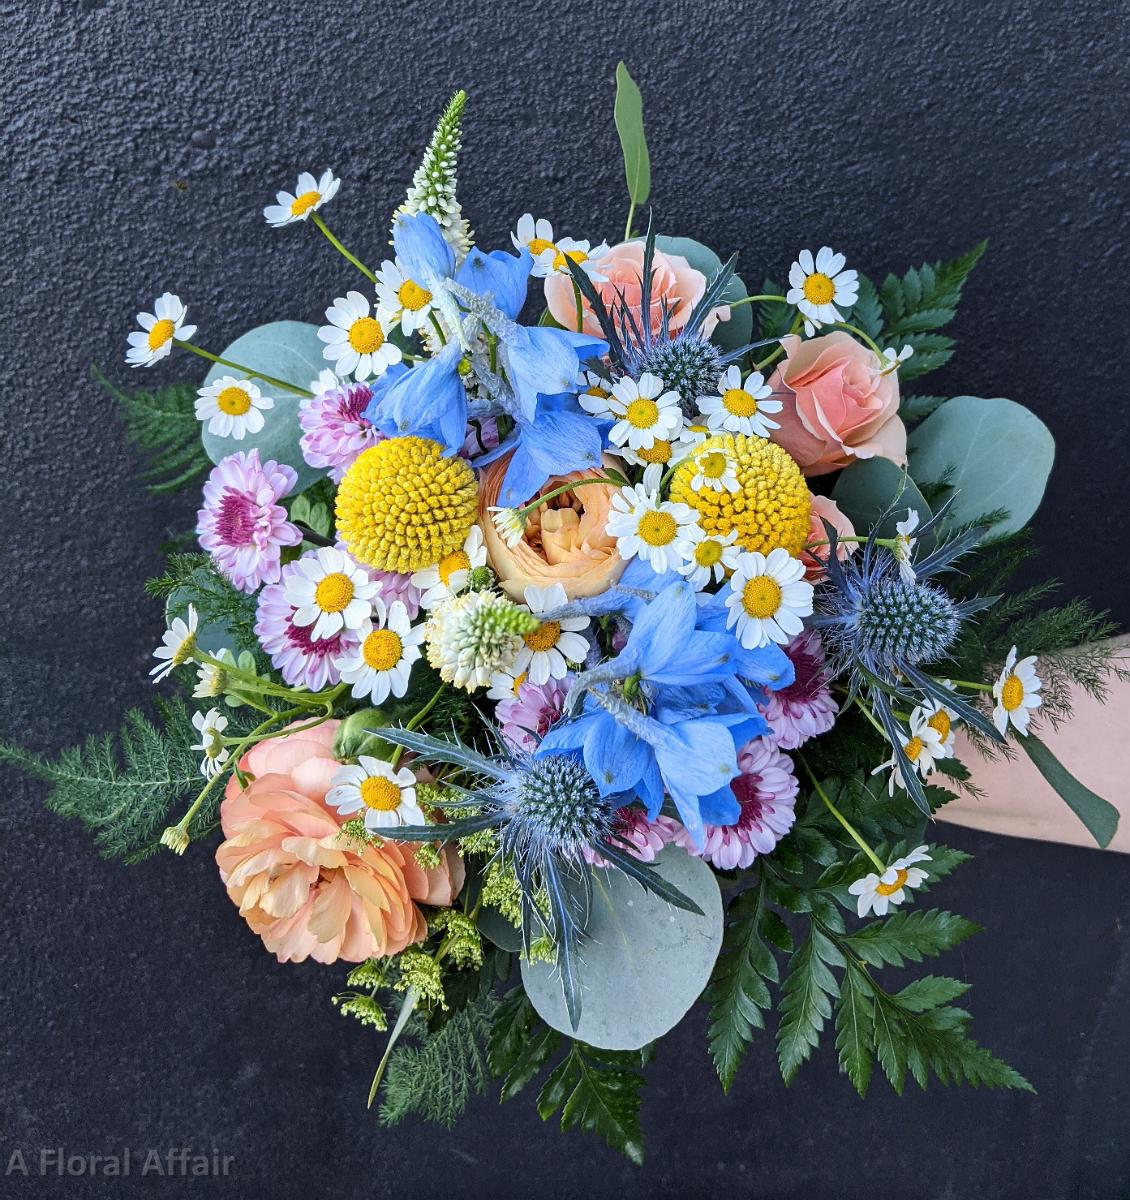 Wild About You Bridesmaid Bouquet